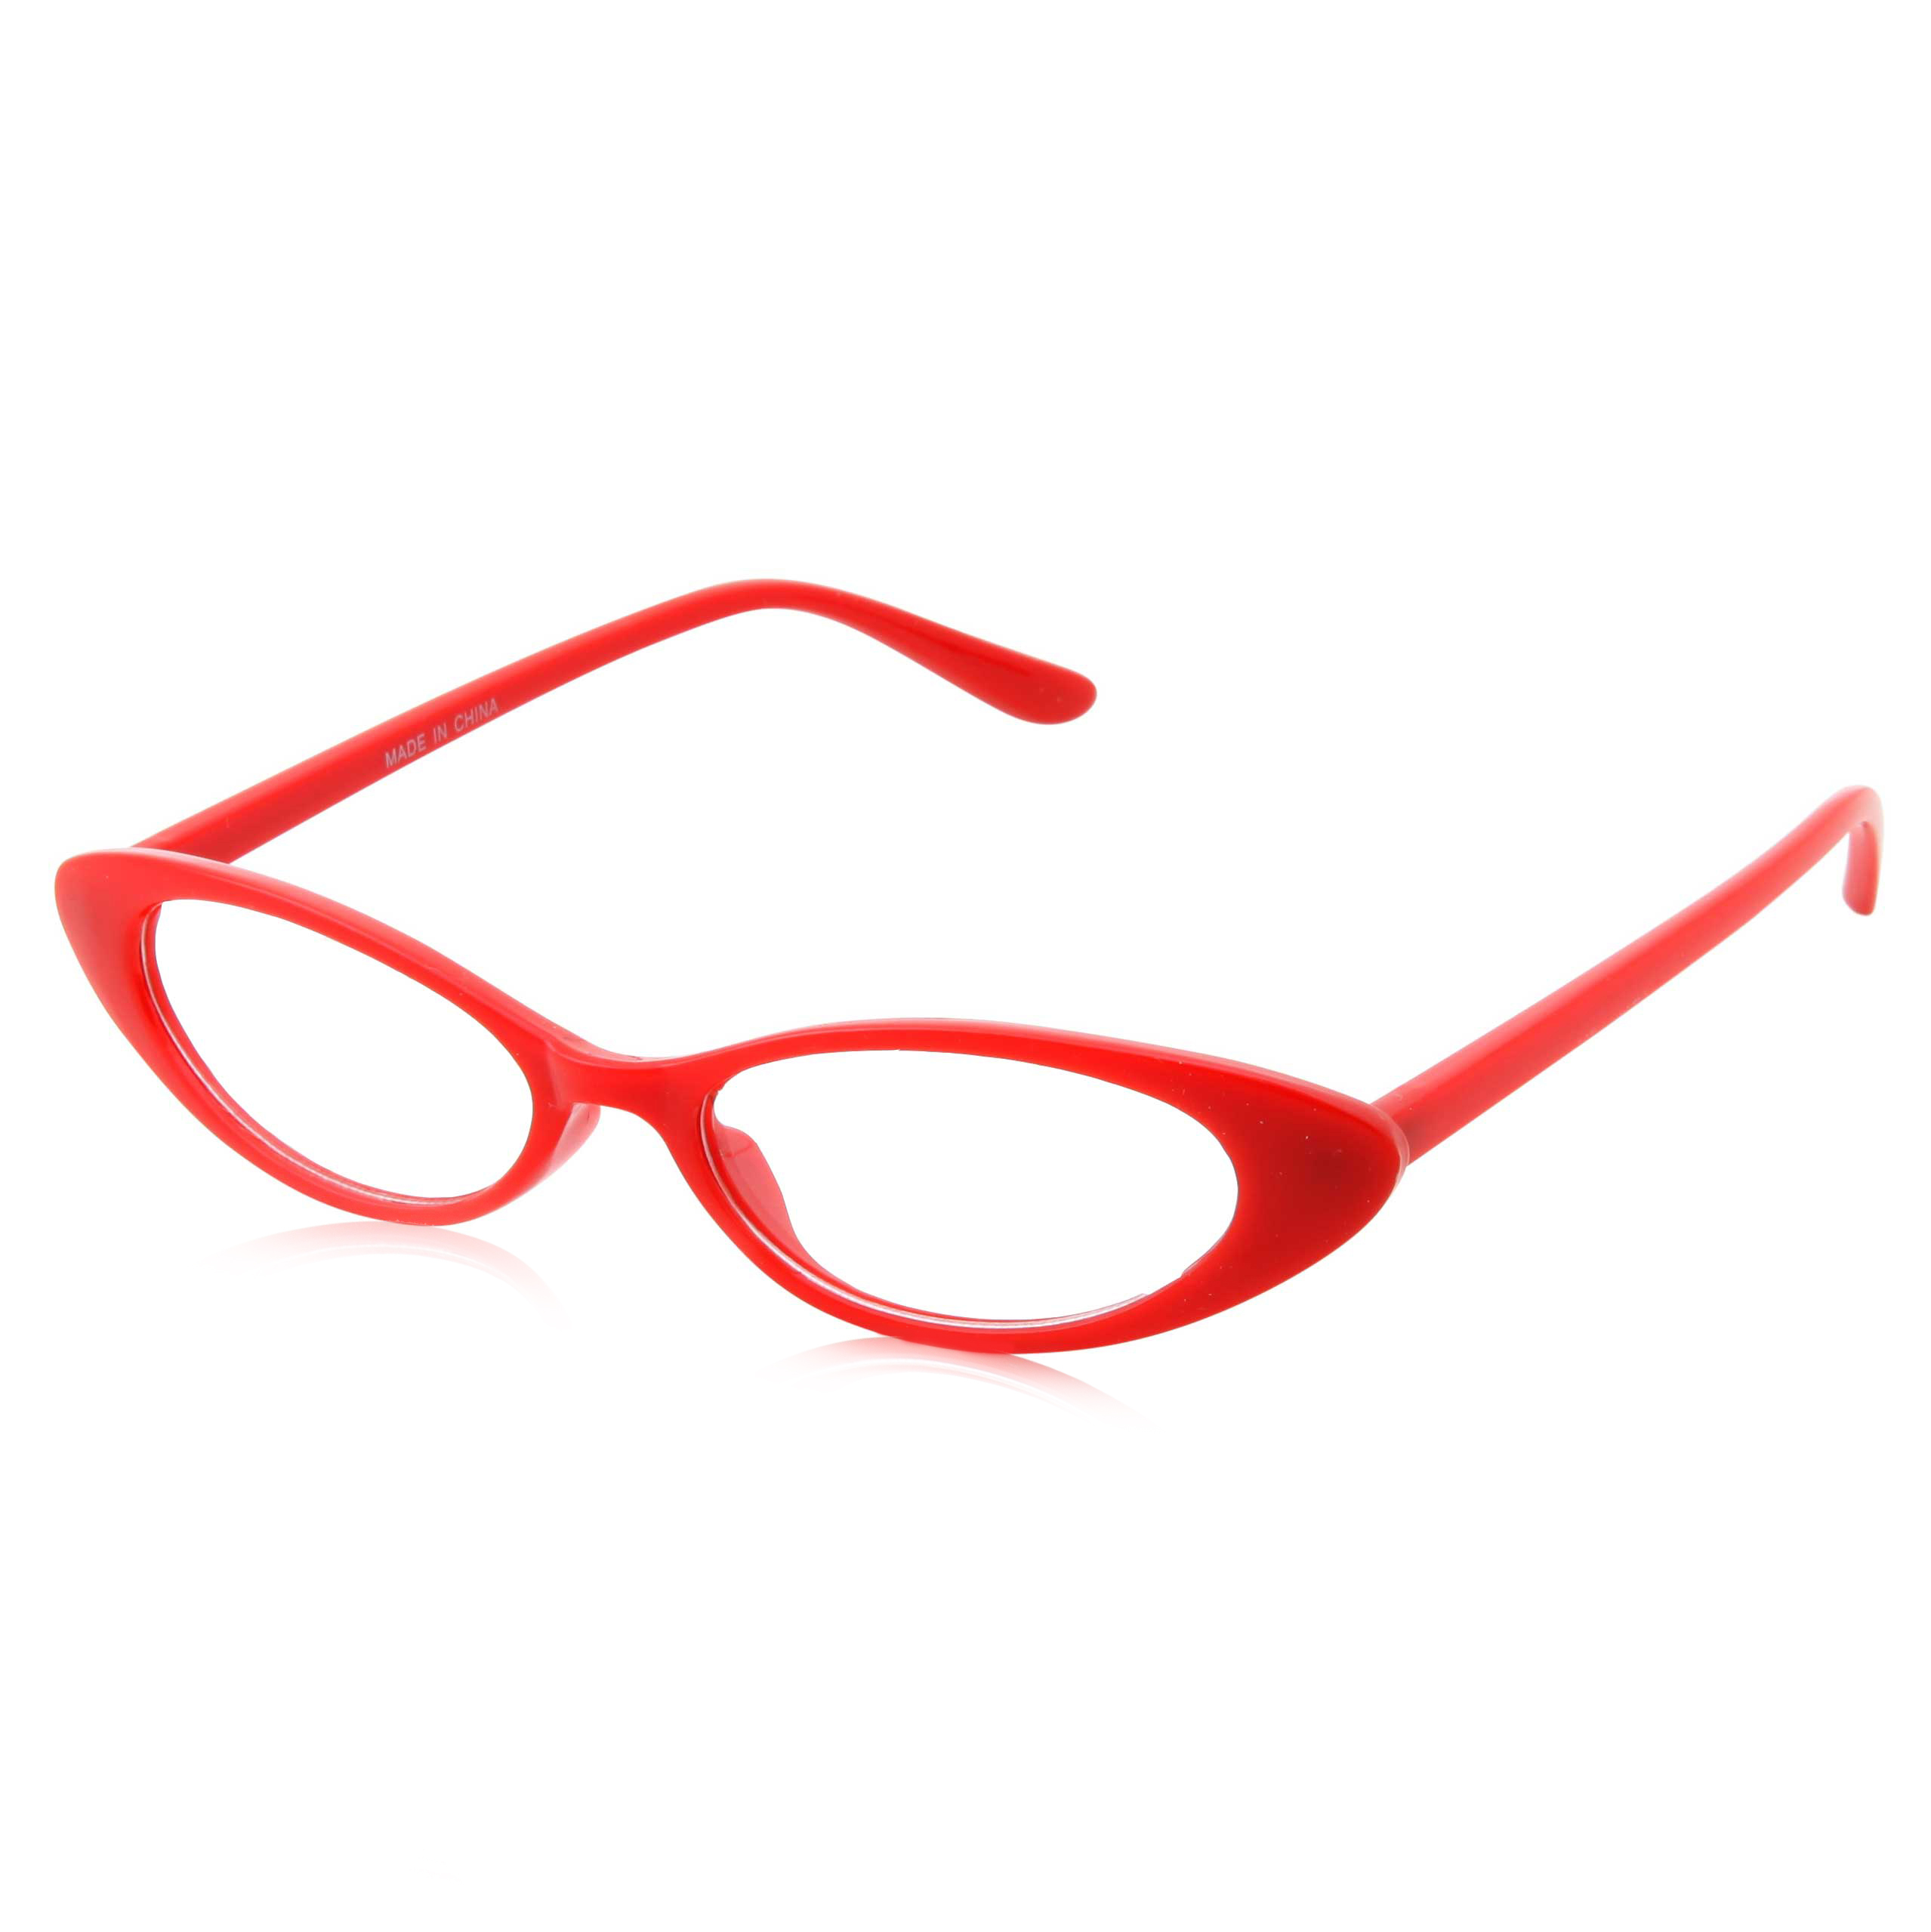 grinderPUNCH Retro 90s Red Slim Flat Clear Lens Cat Eye Sunglasses - image 1 of 5